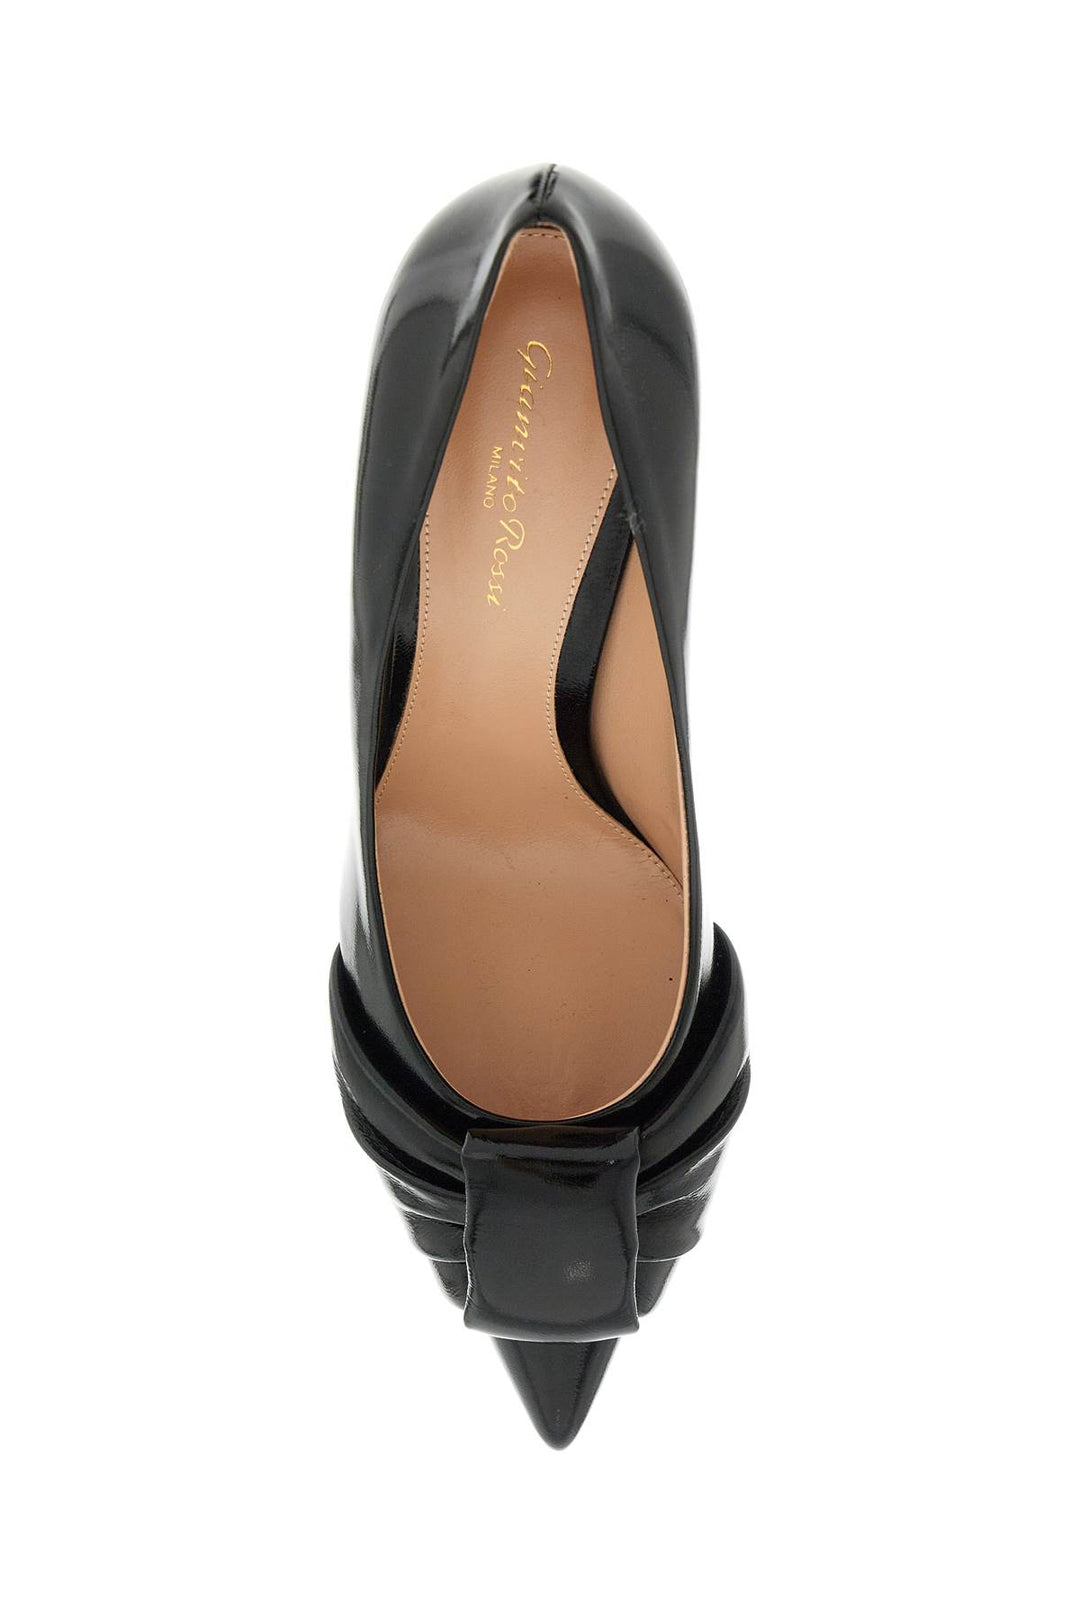 Gianvito Rossi Patent Leather Décollet   Black